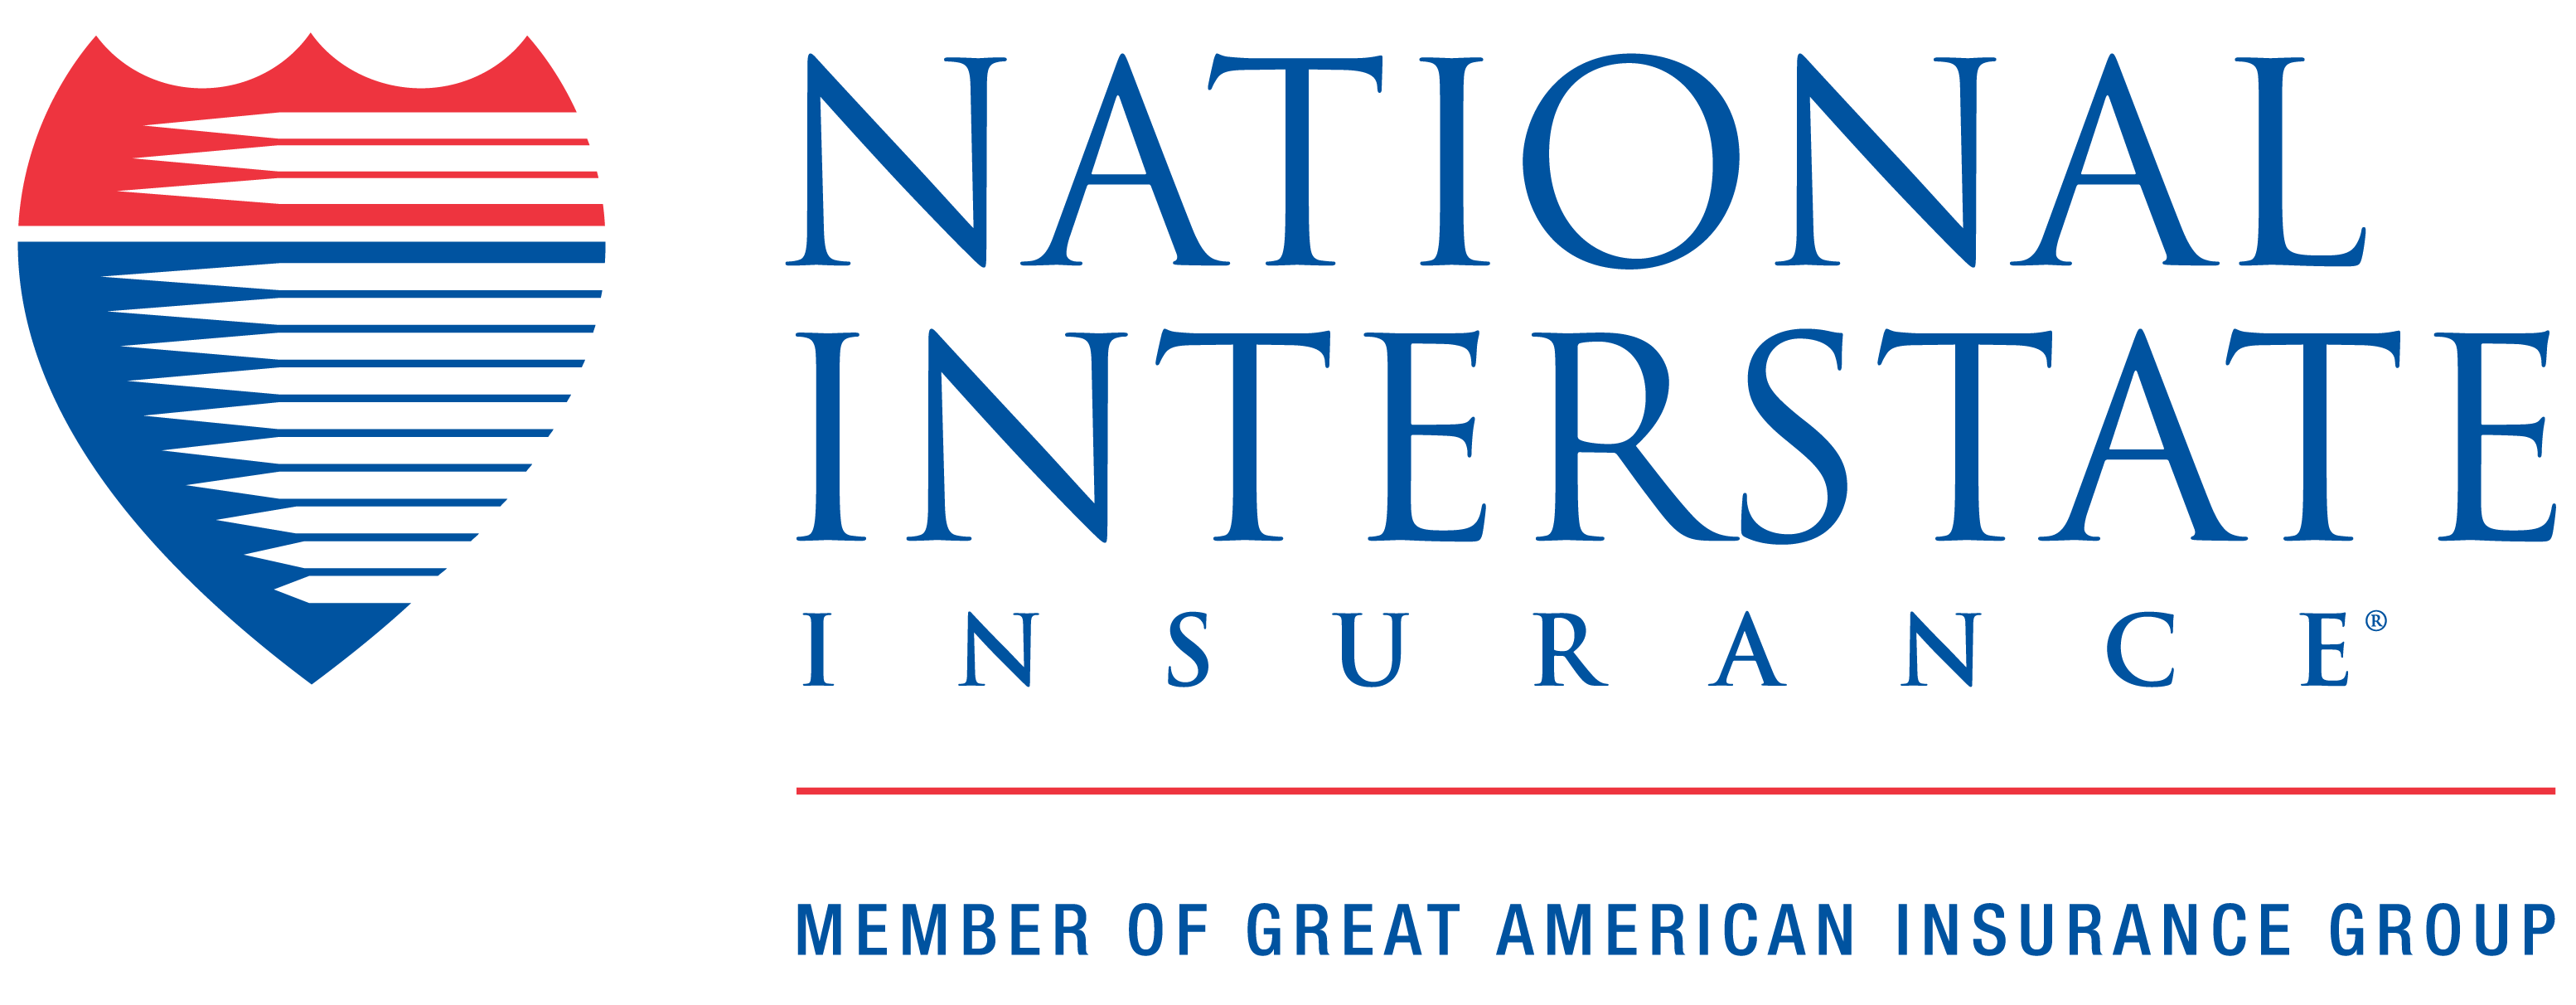 National Interstate Insurance Co.